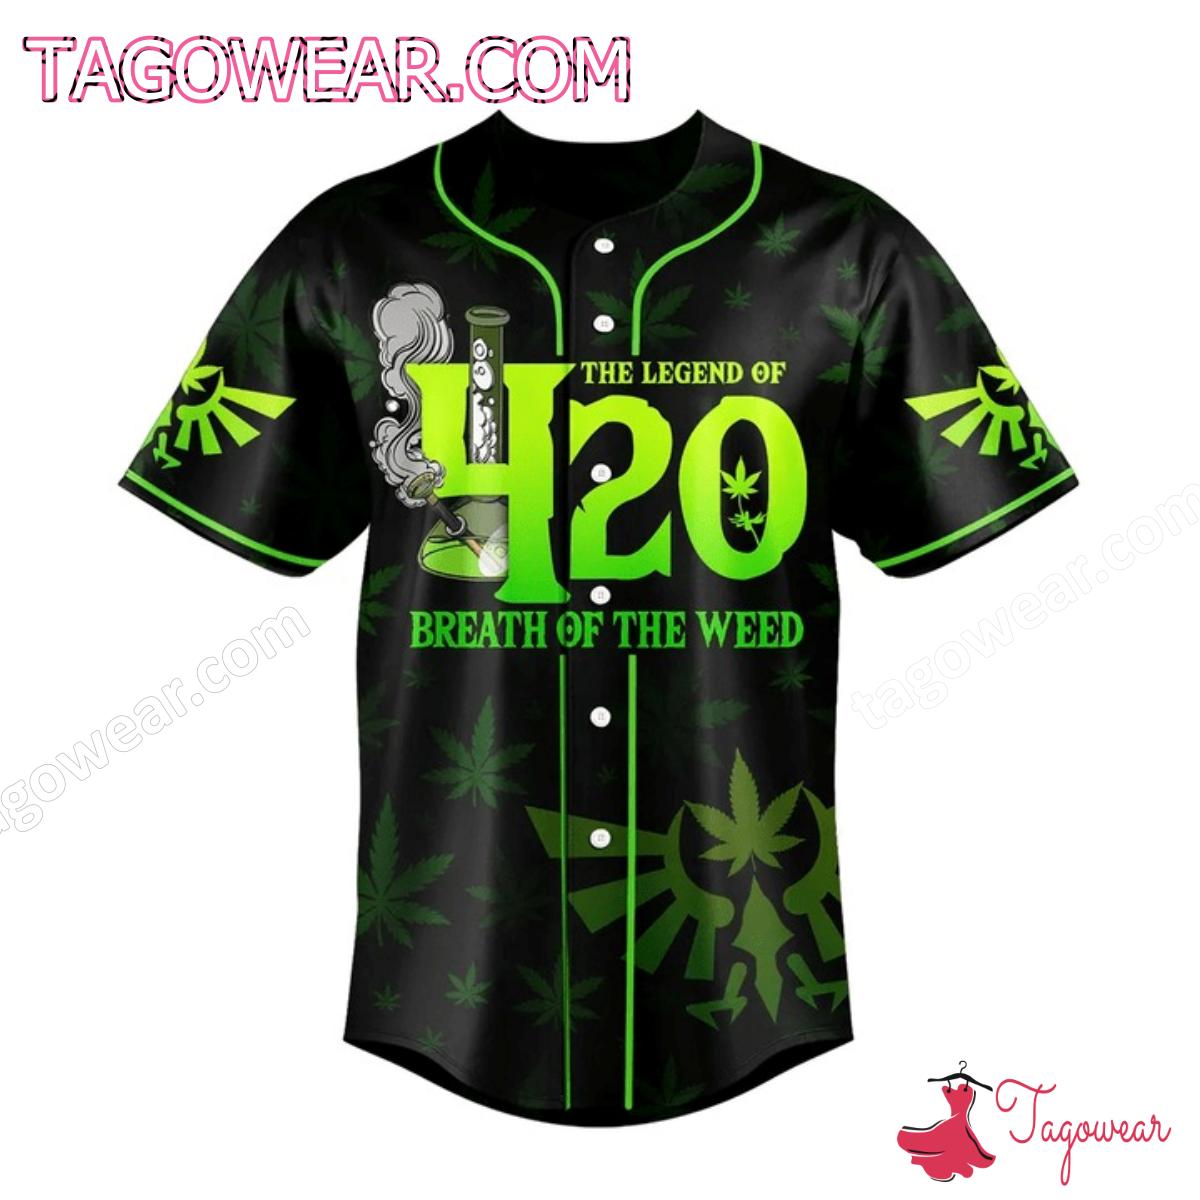 Link The Legend Of 420 Breath Of The Weed Baseball Jersey a